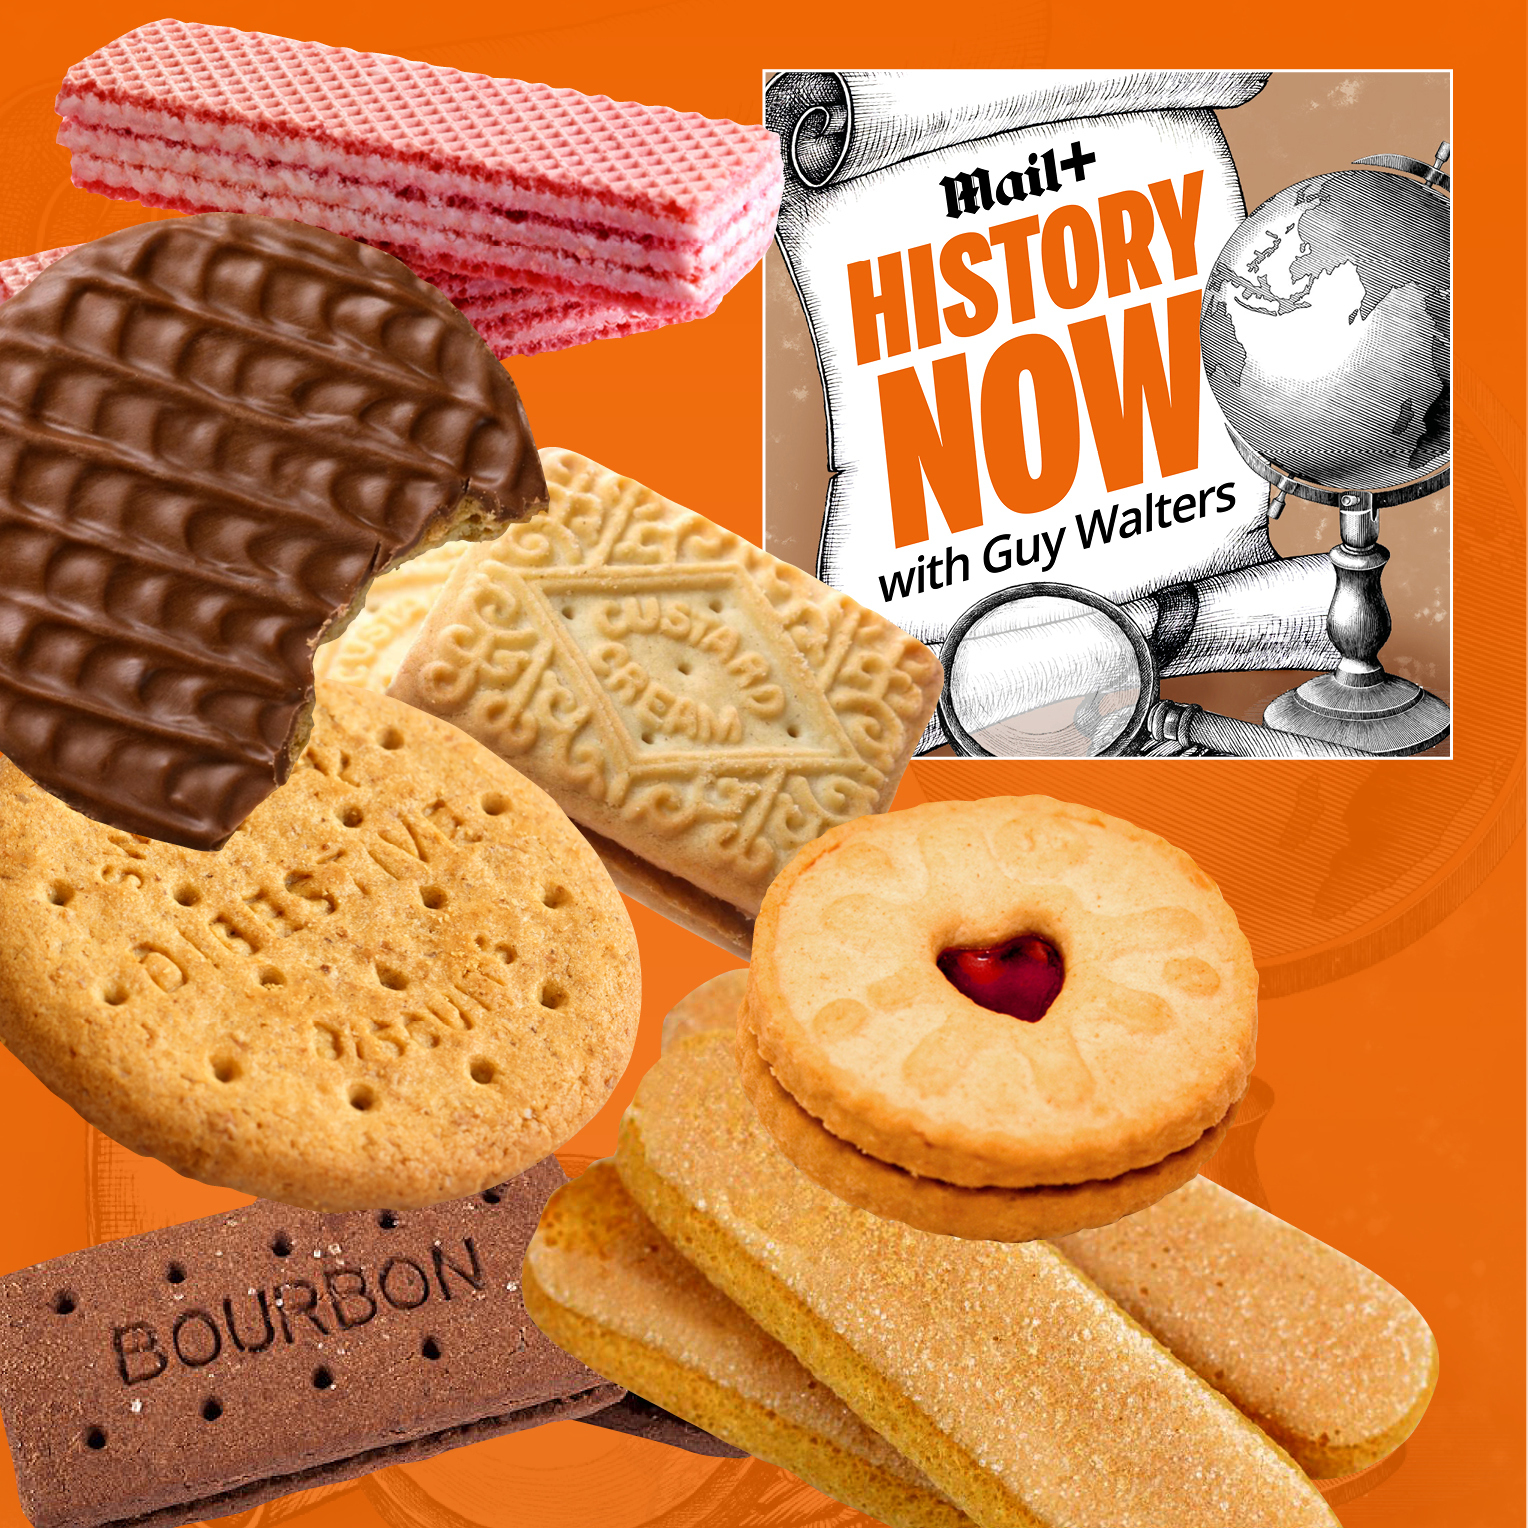 Crumbs! The curious history of a very British treat - the biscuit